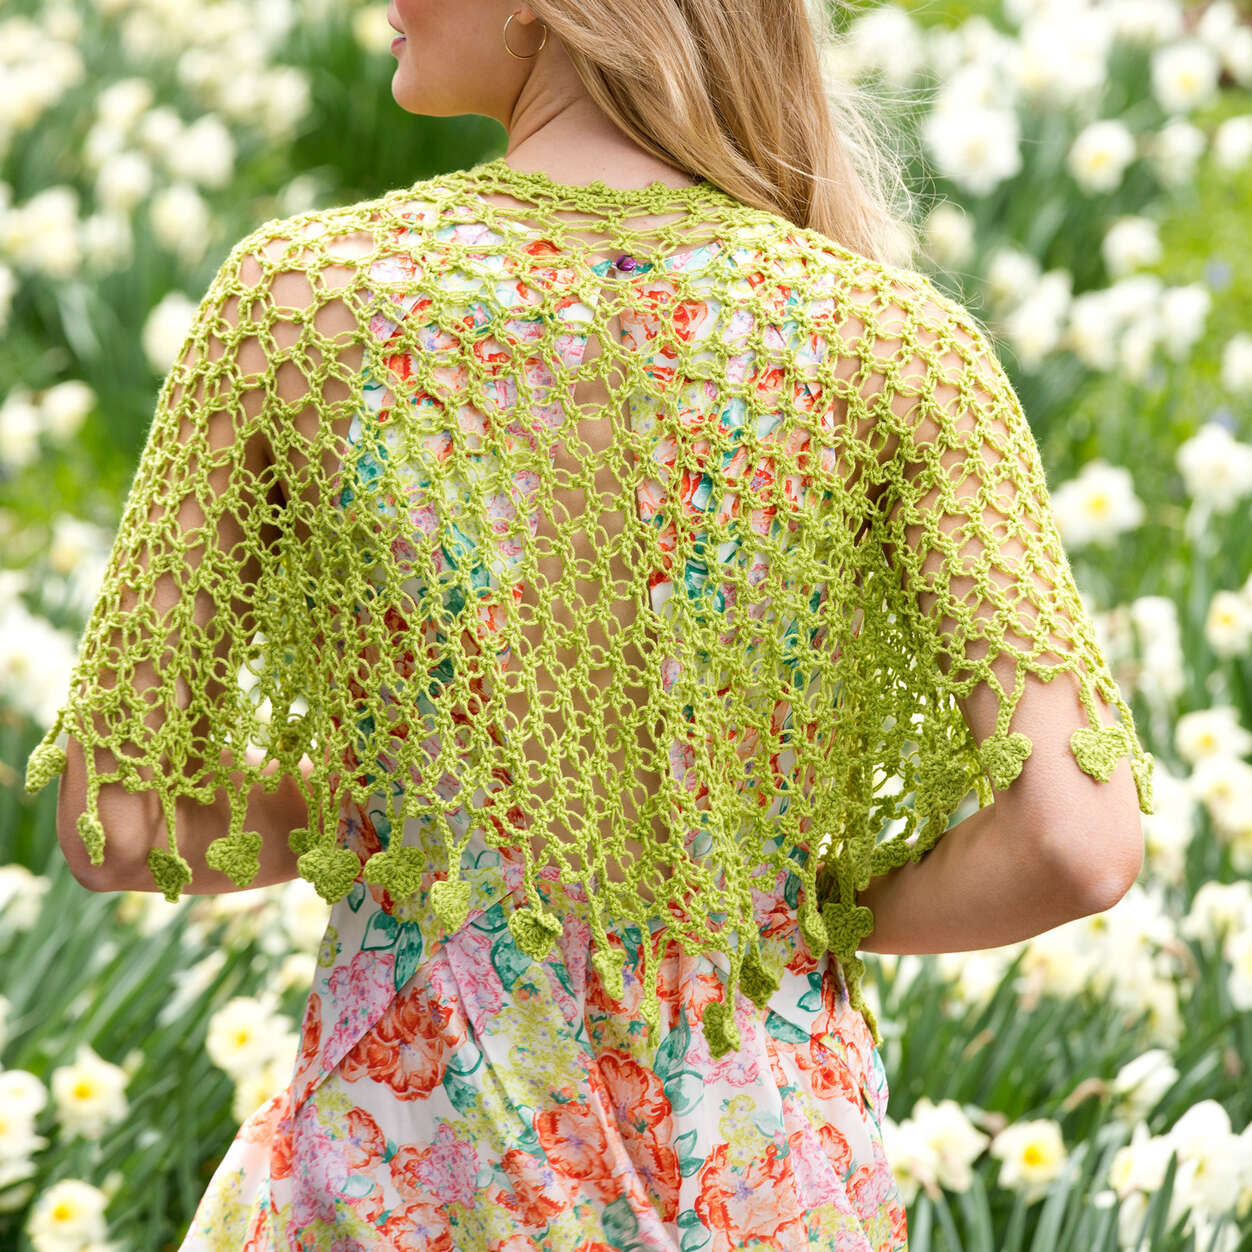 crochet love knot shawl draped over the shoulders of a blonde woman. image shows the back of the model - Marly Bird